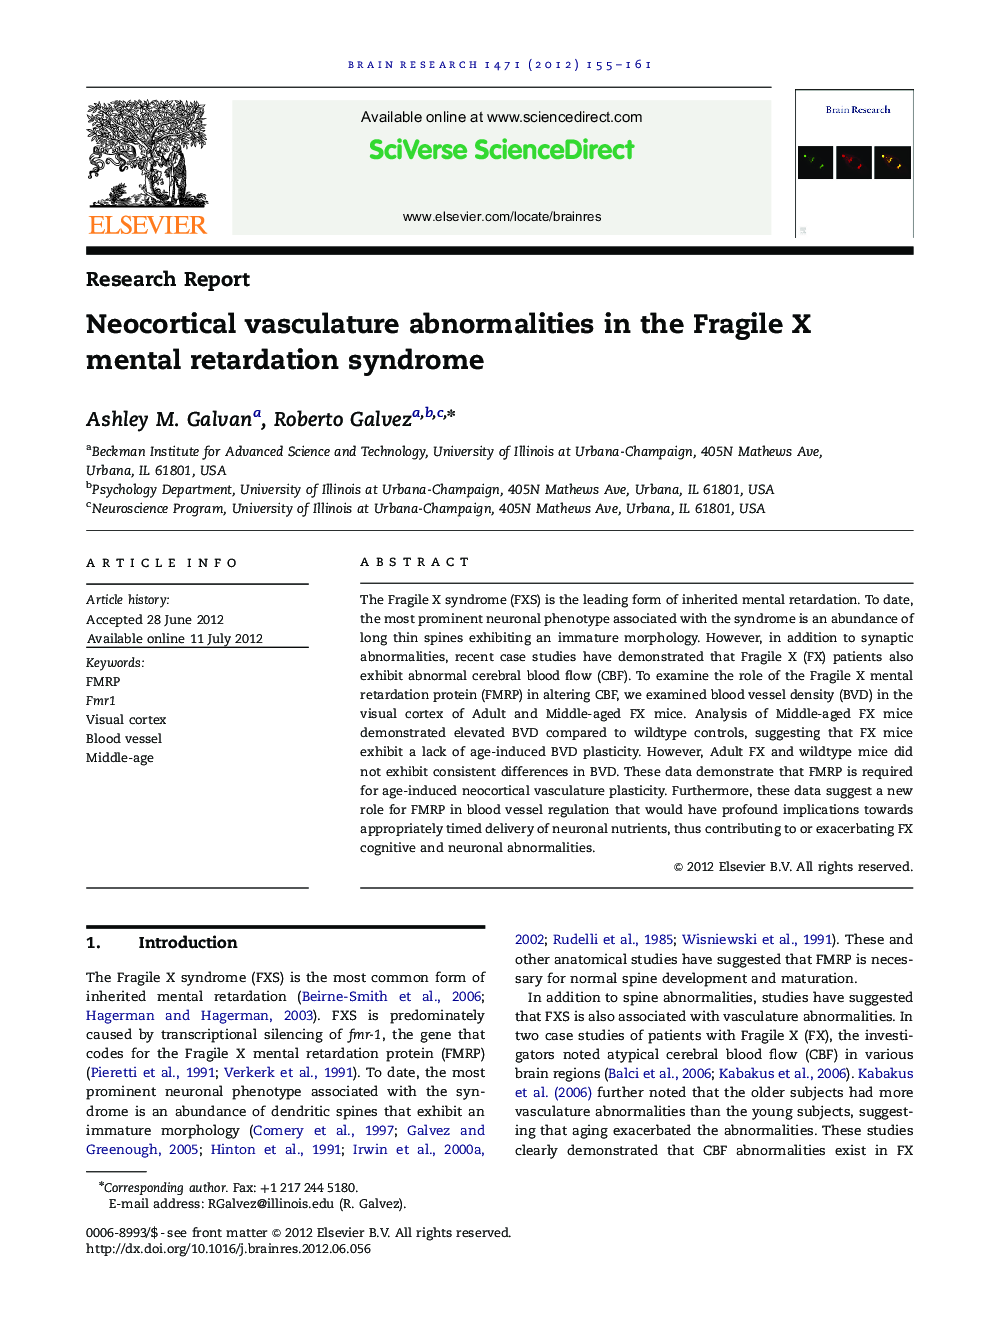 Research ReportNeocortical vasculature abnormalities in the Fragile X mental retardation syndrome